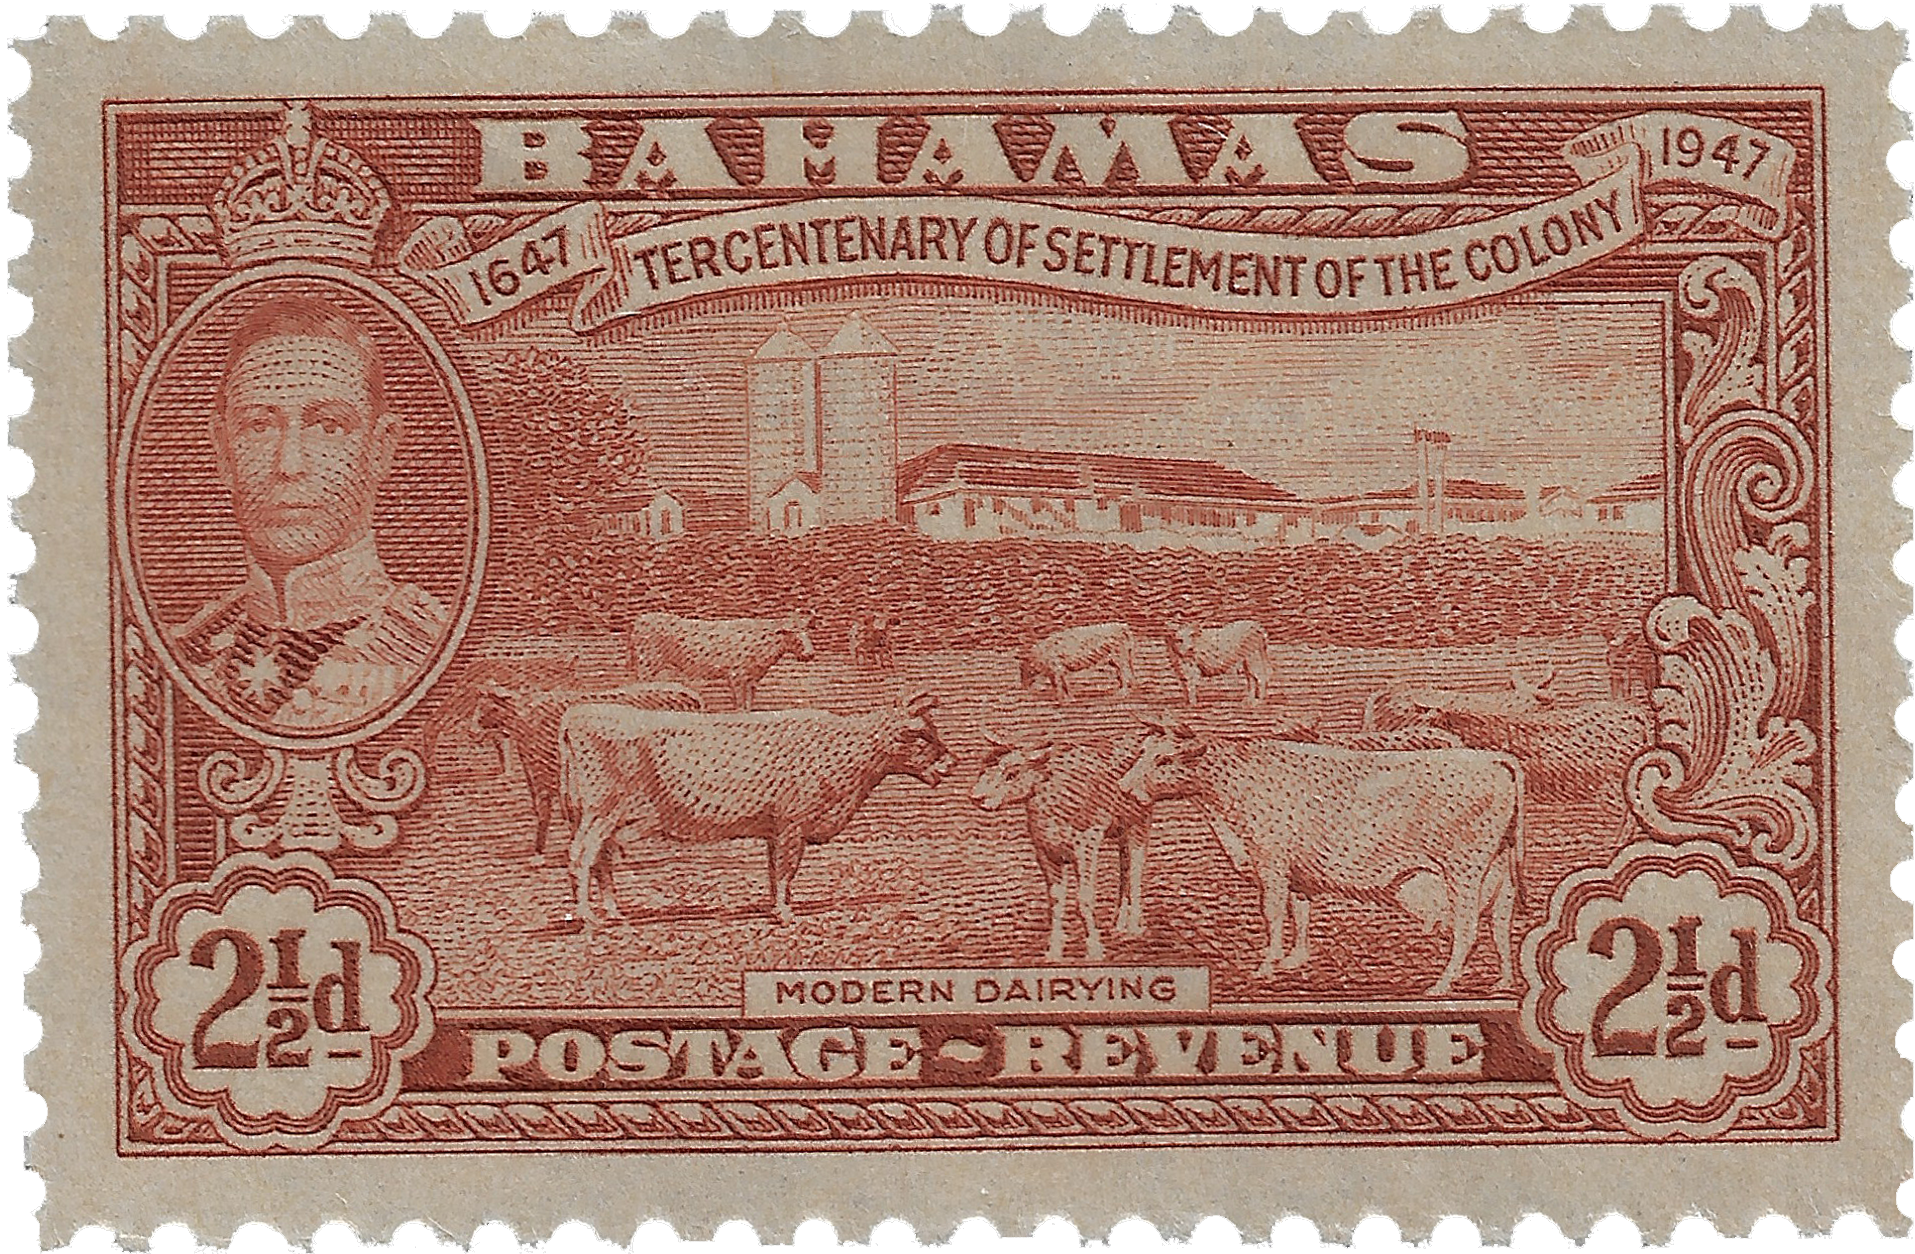 2.5d 1948, 1647 Tercentenary of Settlement of the Colony, Modern Dairying